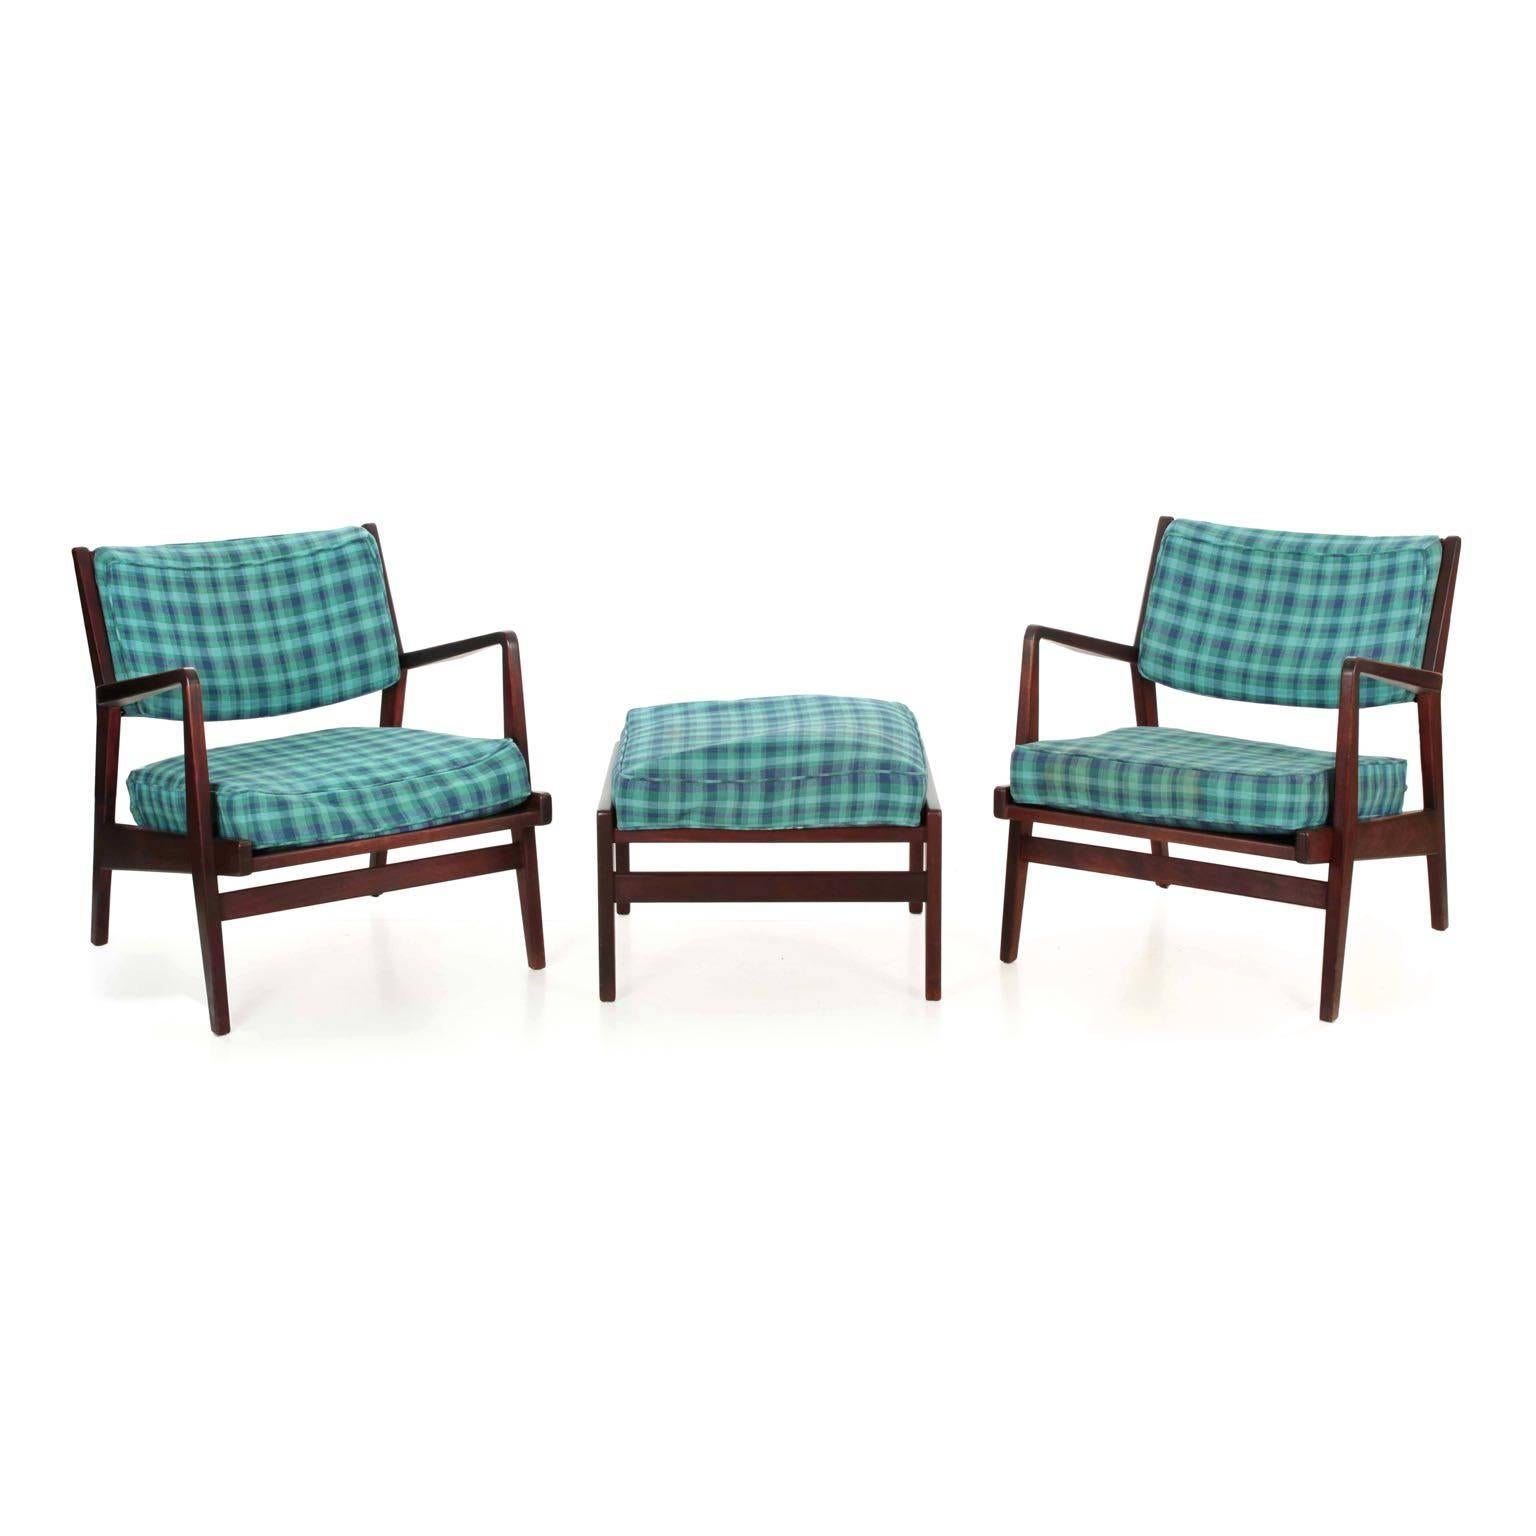 Pair of Jens Risom walnut U4230 armchairs with ottoman
Retaining original labels under cushion, circa 1960s

This gorgeous pair of model U4230 armchairs and matched ottoman were designed by Jens Risom for Jens Risom Design and retain their